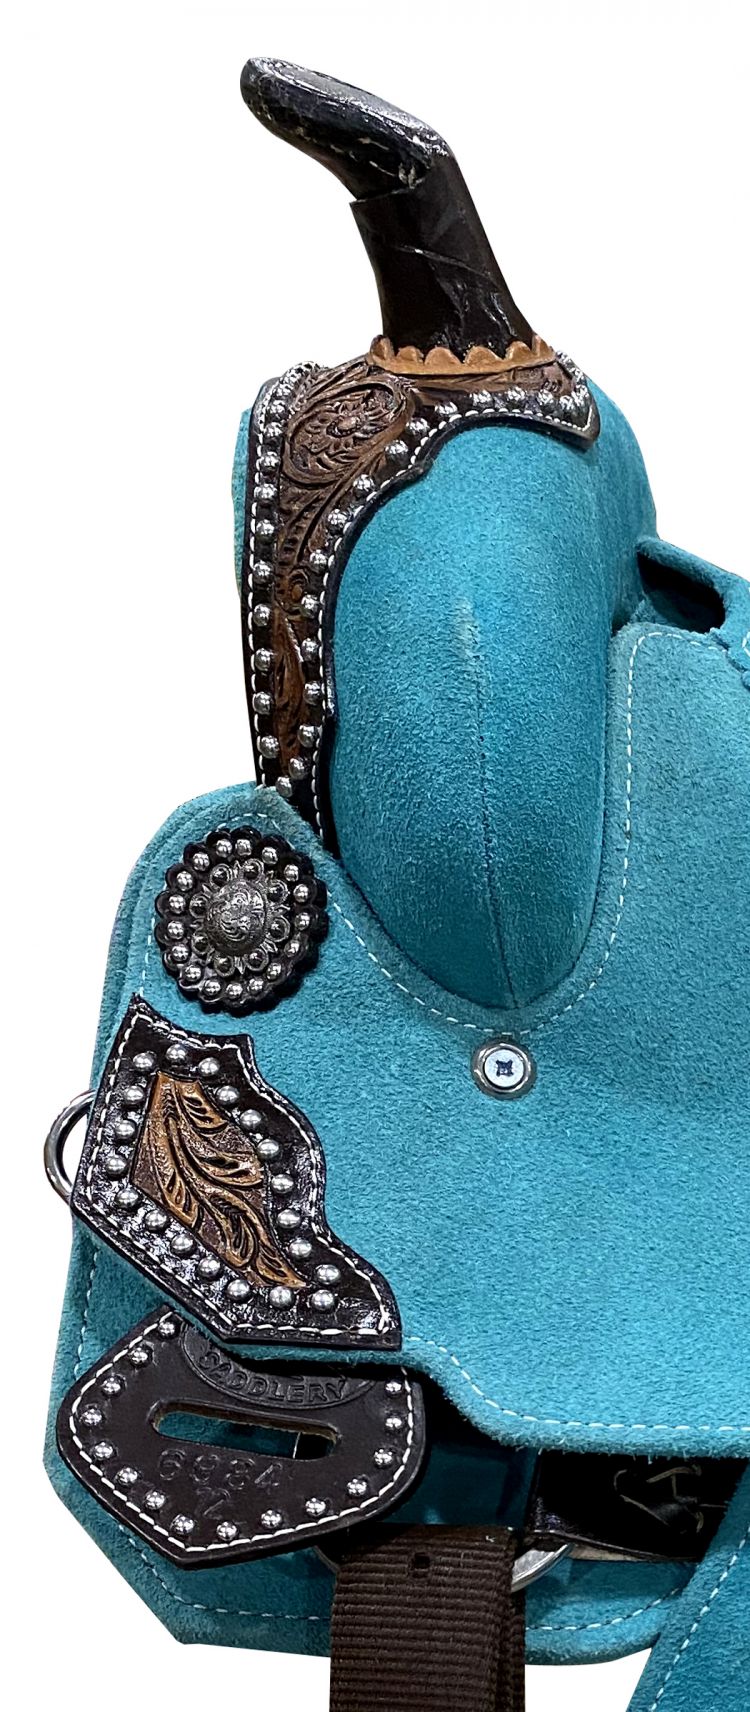 12" DOUBLE T   Teal Rough Out Barrel style saddle with Southwest Printed Inlay Barrel Saddle Shiloh   